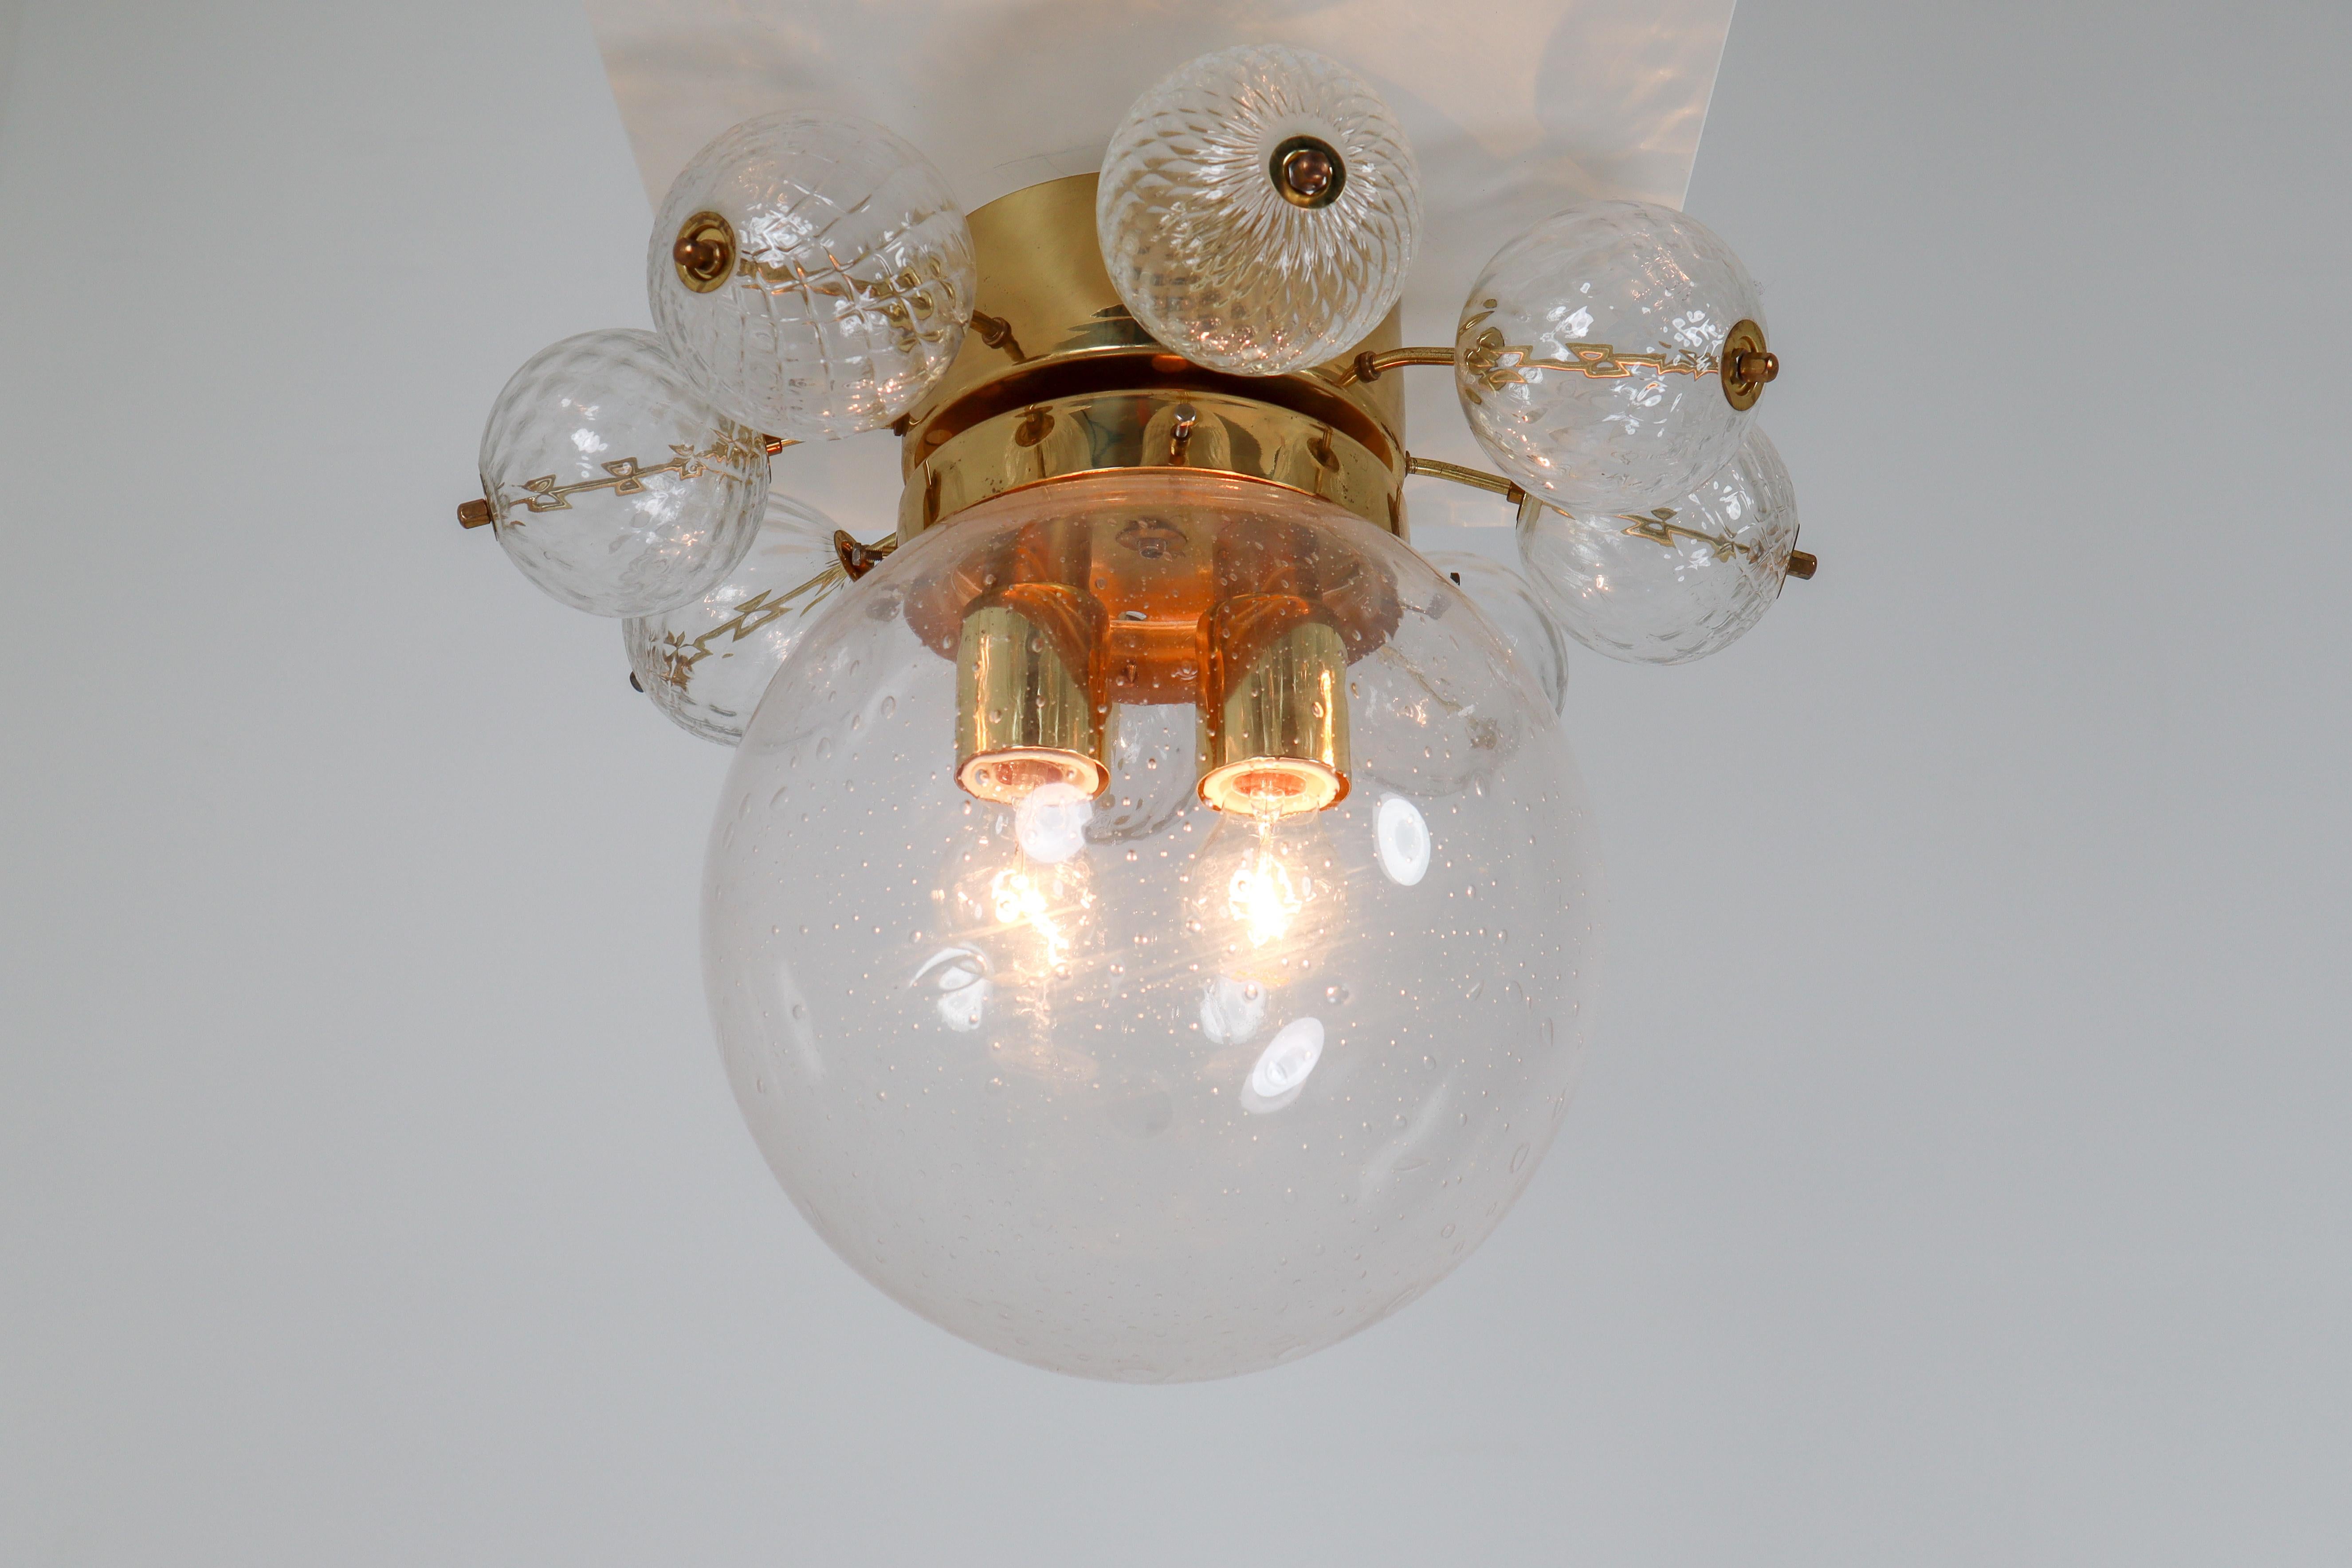 Large Midcentury Brass Ceiling Lamp-Chandeliers with Hand Blown Glass For Sale 1